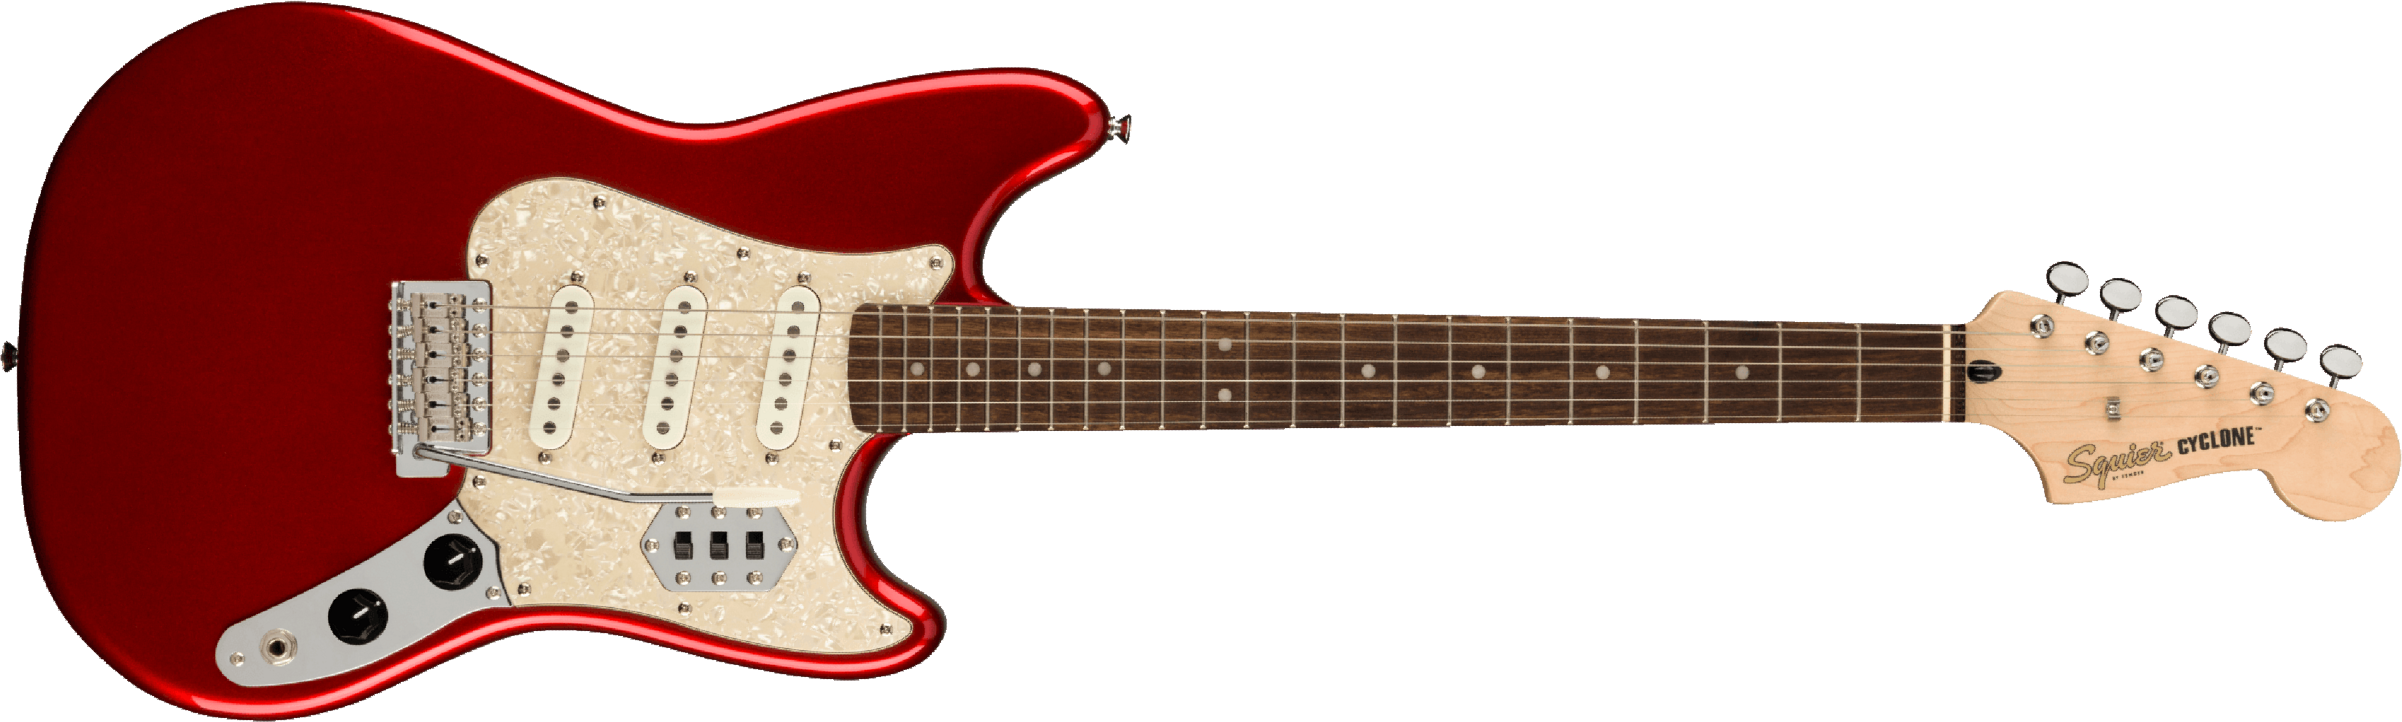 Squier Cyclone Paranormal 3s Trem Lau - Candy Apple Red - Retro rock electric guitar - Main picture